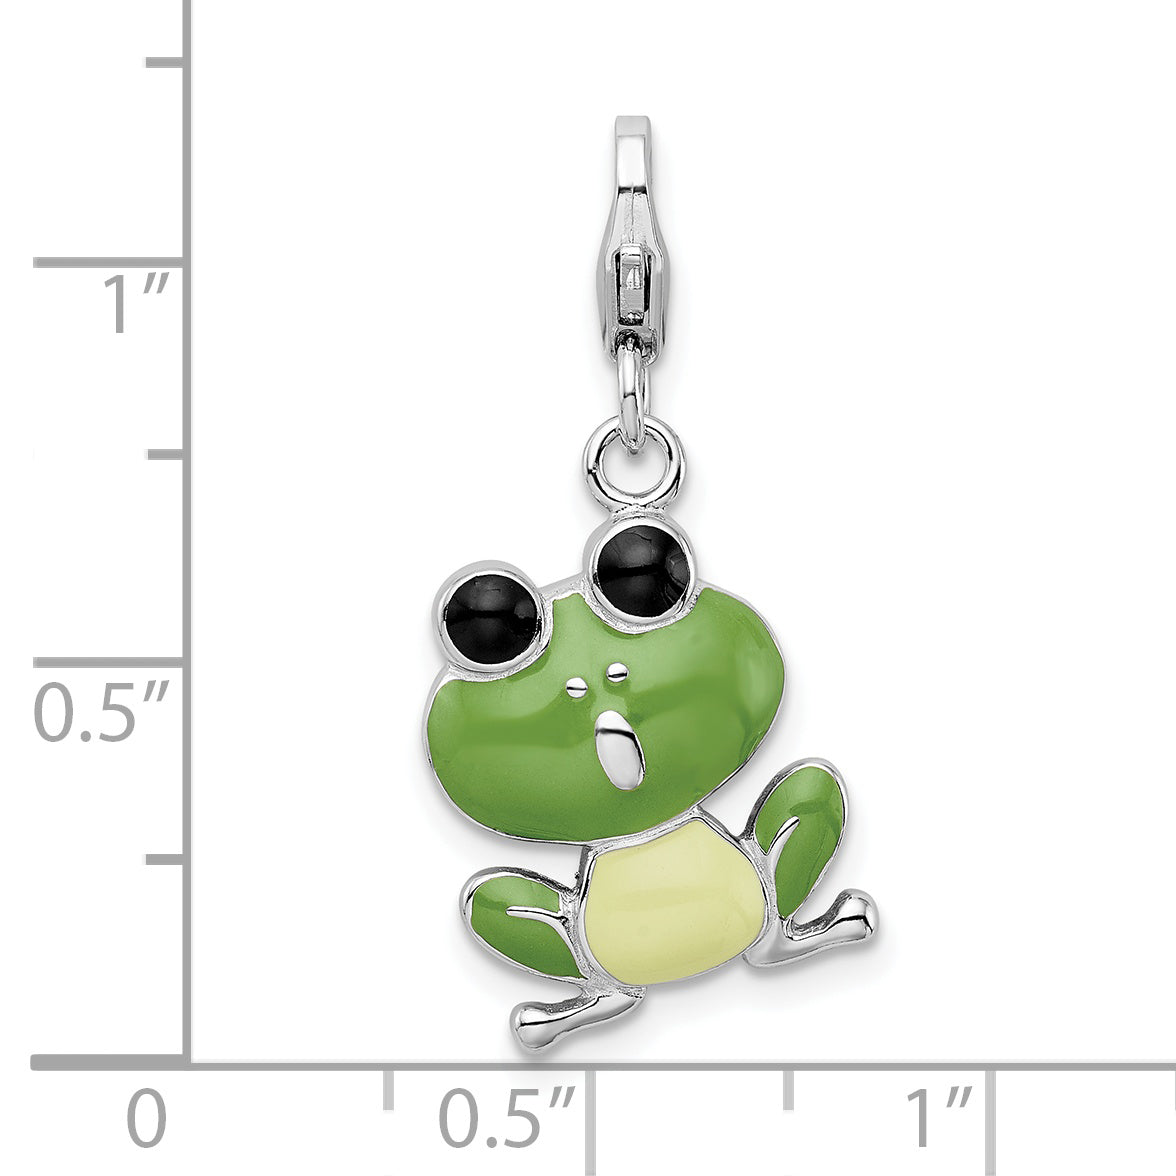 Amore La Vita Sterling Silver Rhodium-plated Polished Enameled Frog Charm with Fancy Lobster Clasp